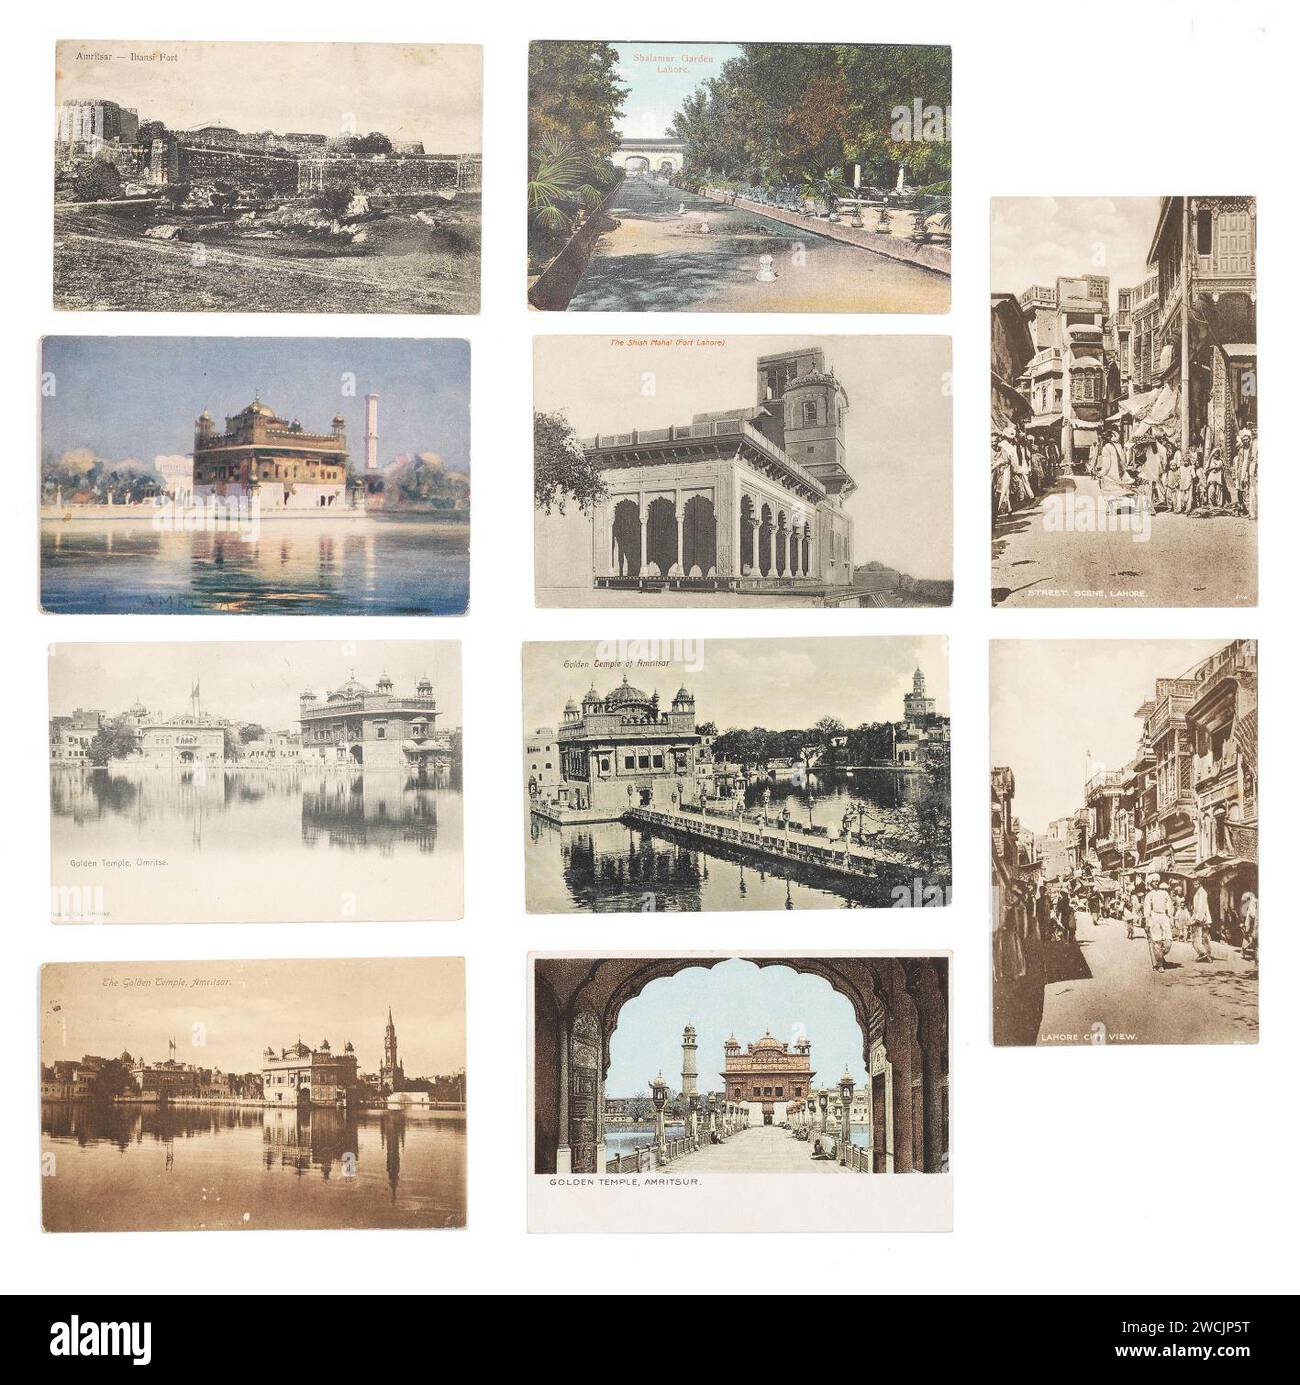 A collection of postcards of Amritsar and Lahore. Europe, circa 1910. Comprising five of the Golden Temple, Amritsar; the Ihansi Fort, Amritsar, the Shish Mahal, Lahore; Shalamar Garden, Lahore; and two Lahore street views. Stock Photo